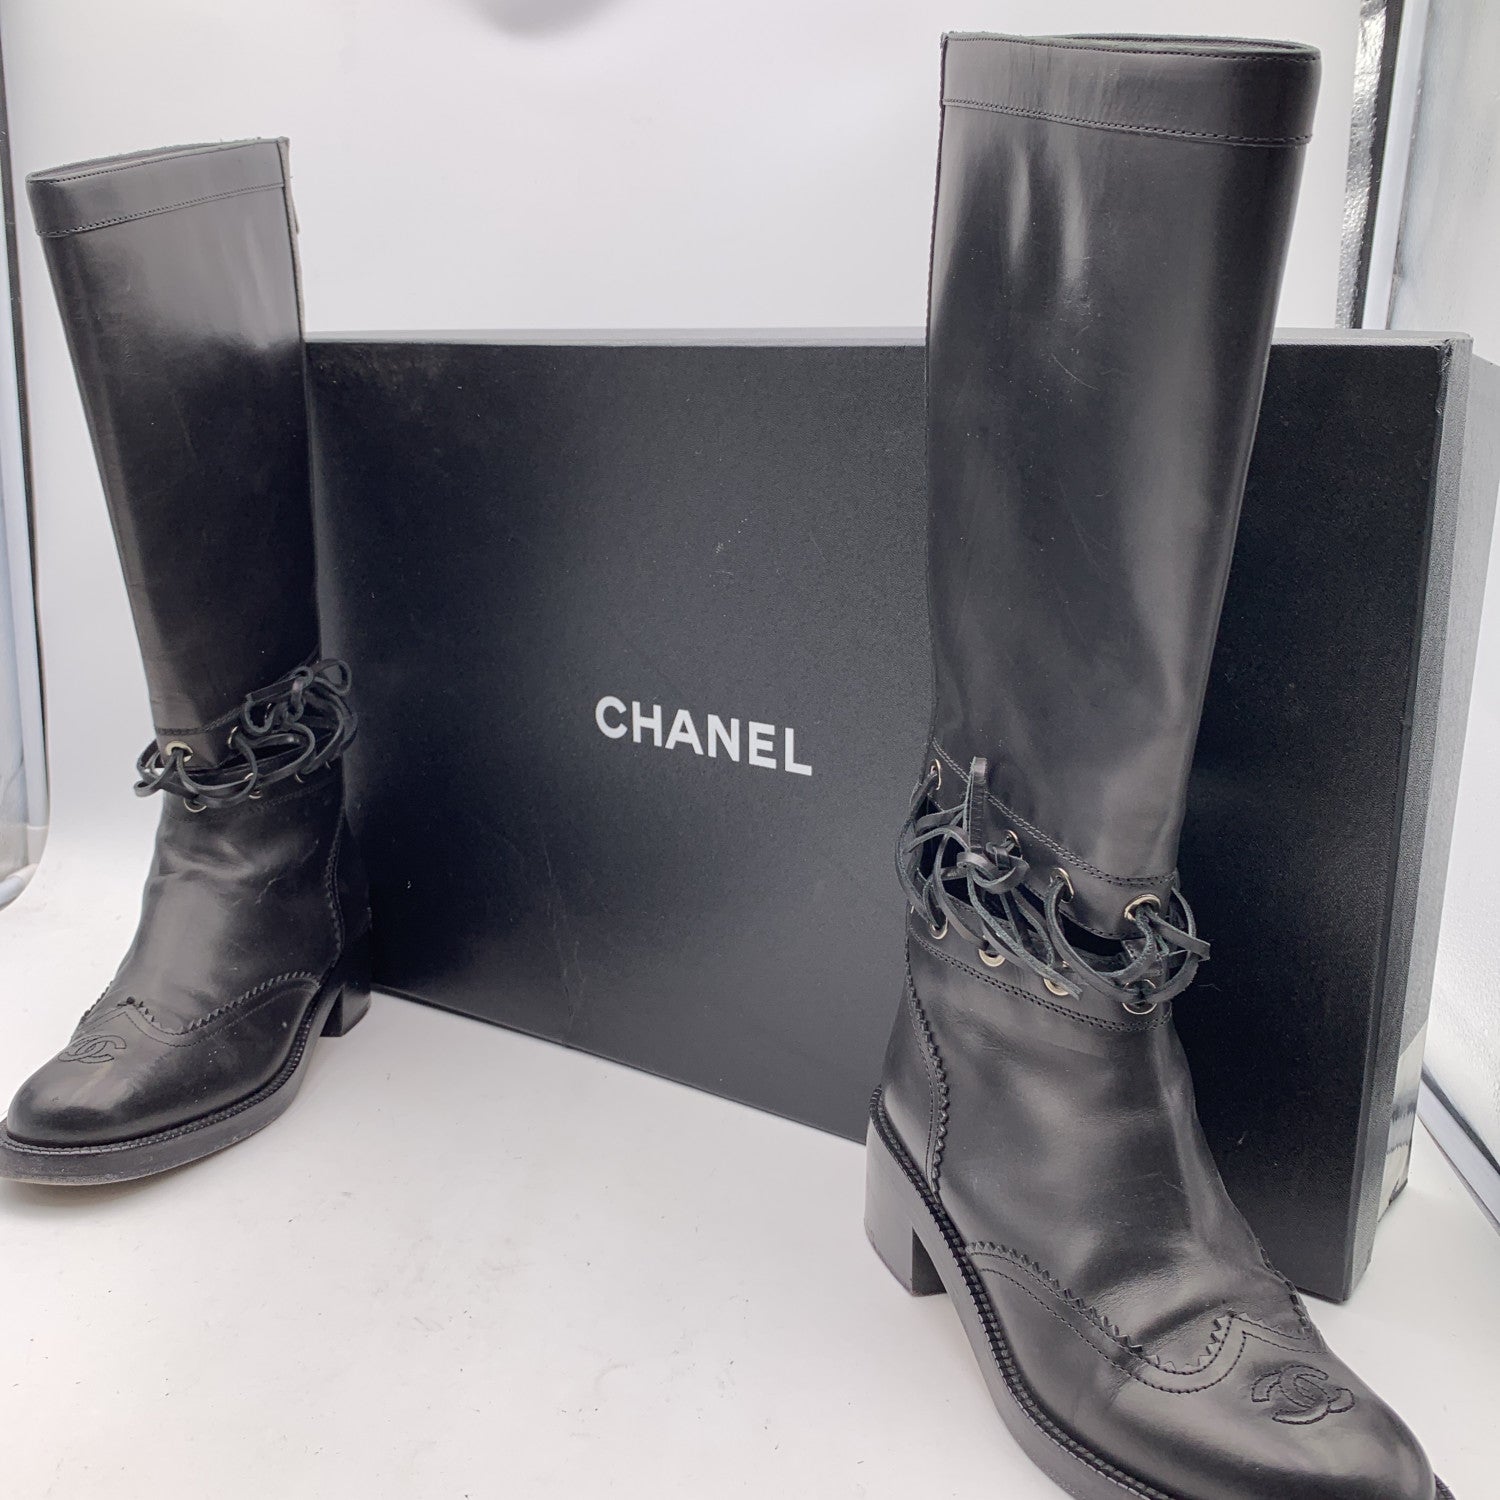 CHANEL Boots